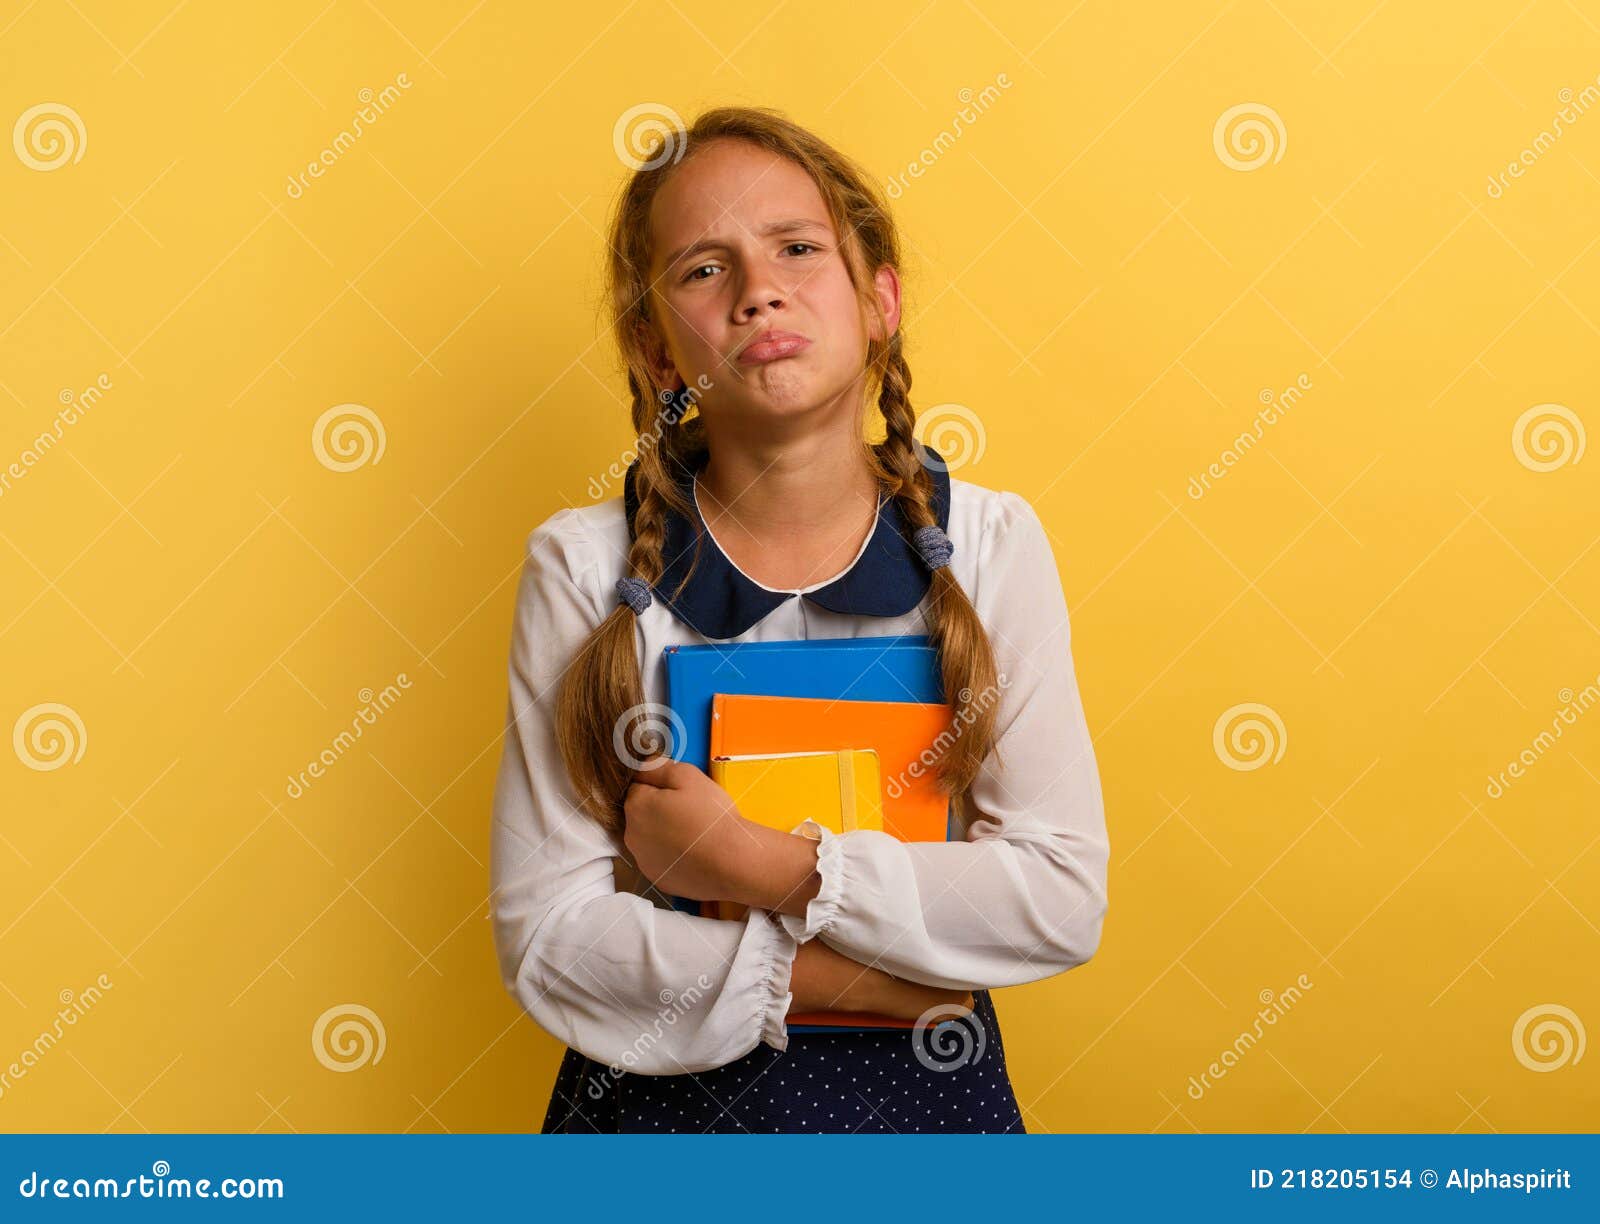 girl cries because he has a lot of school homework. emotional expression. yellow background